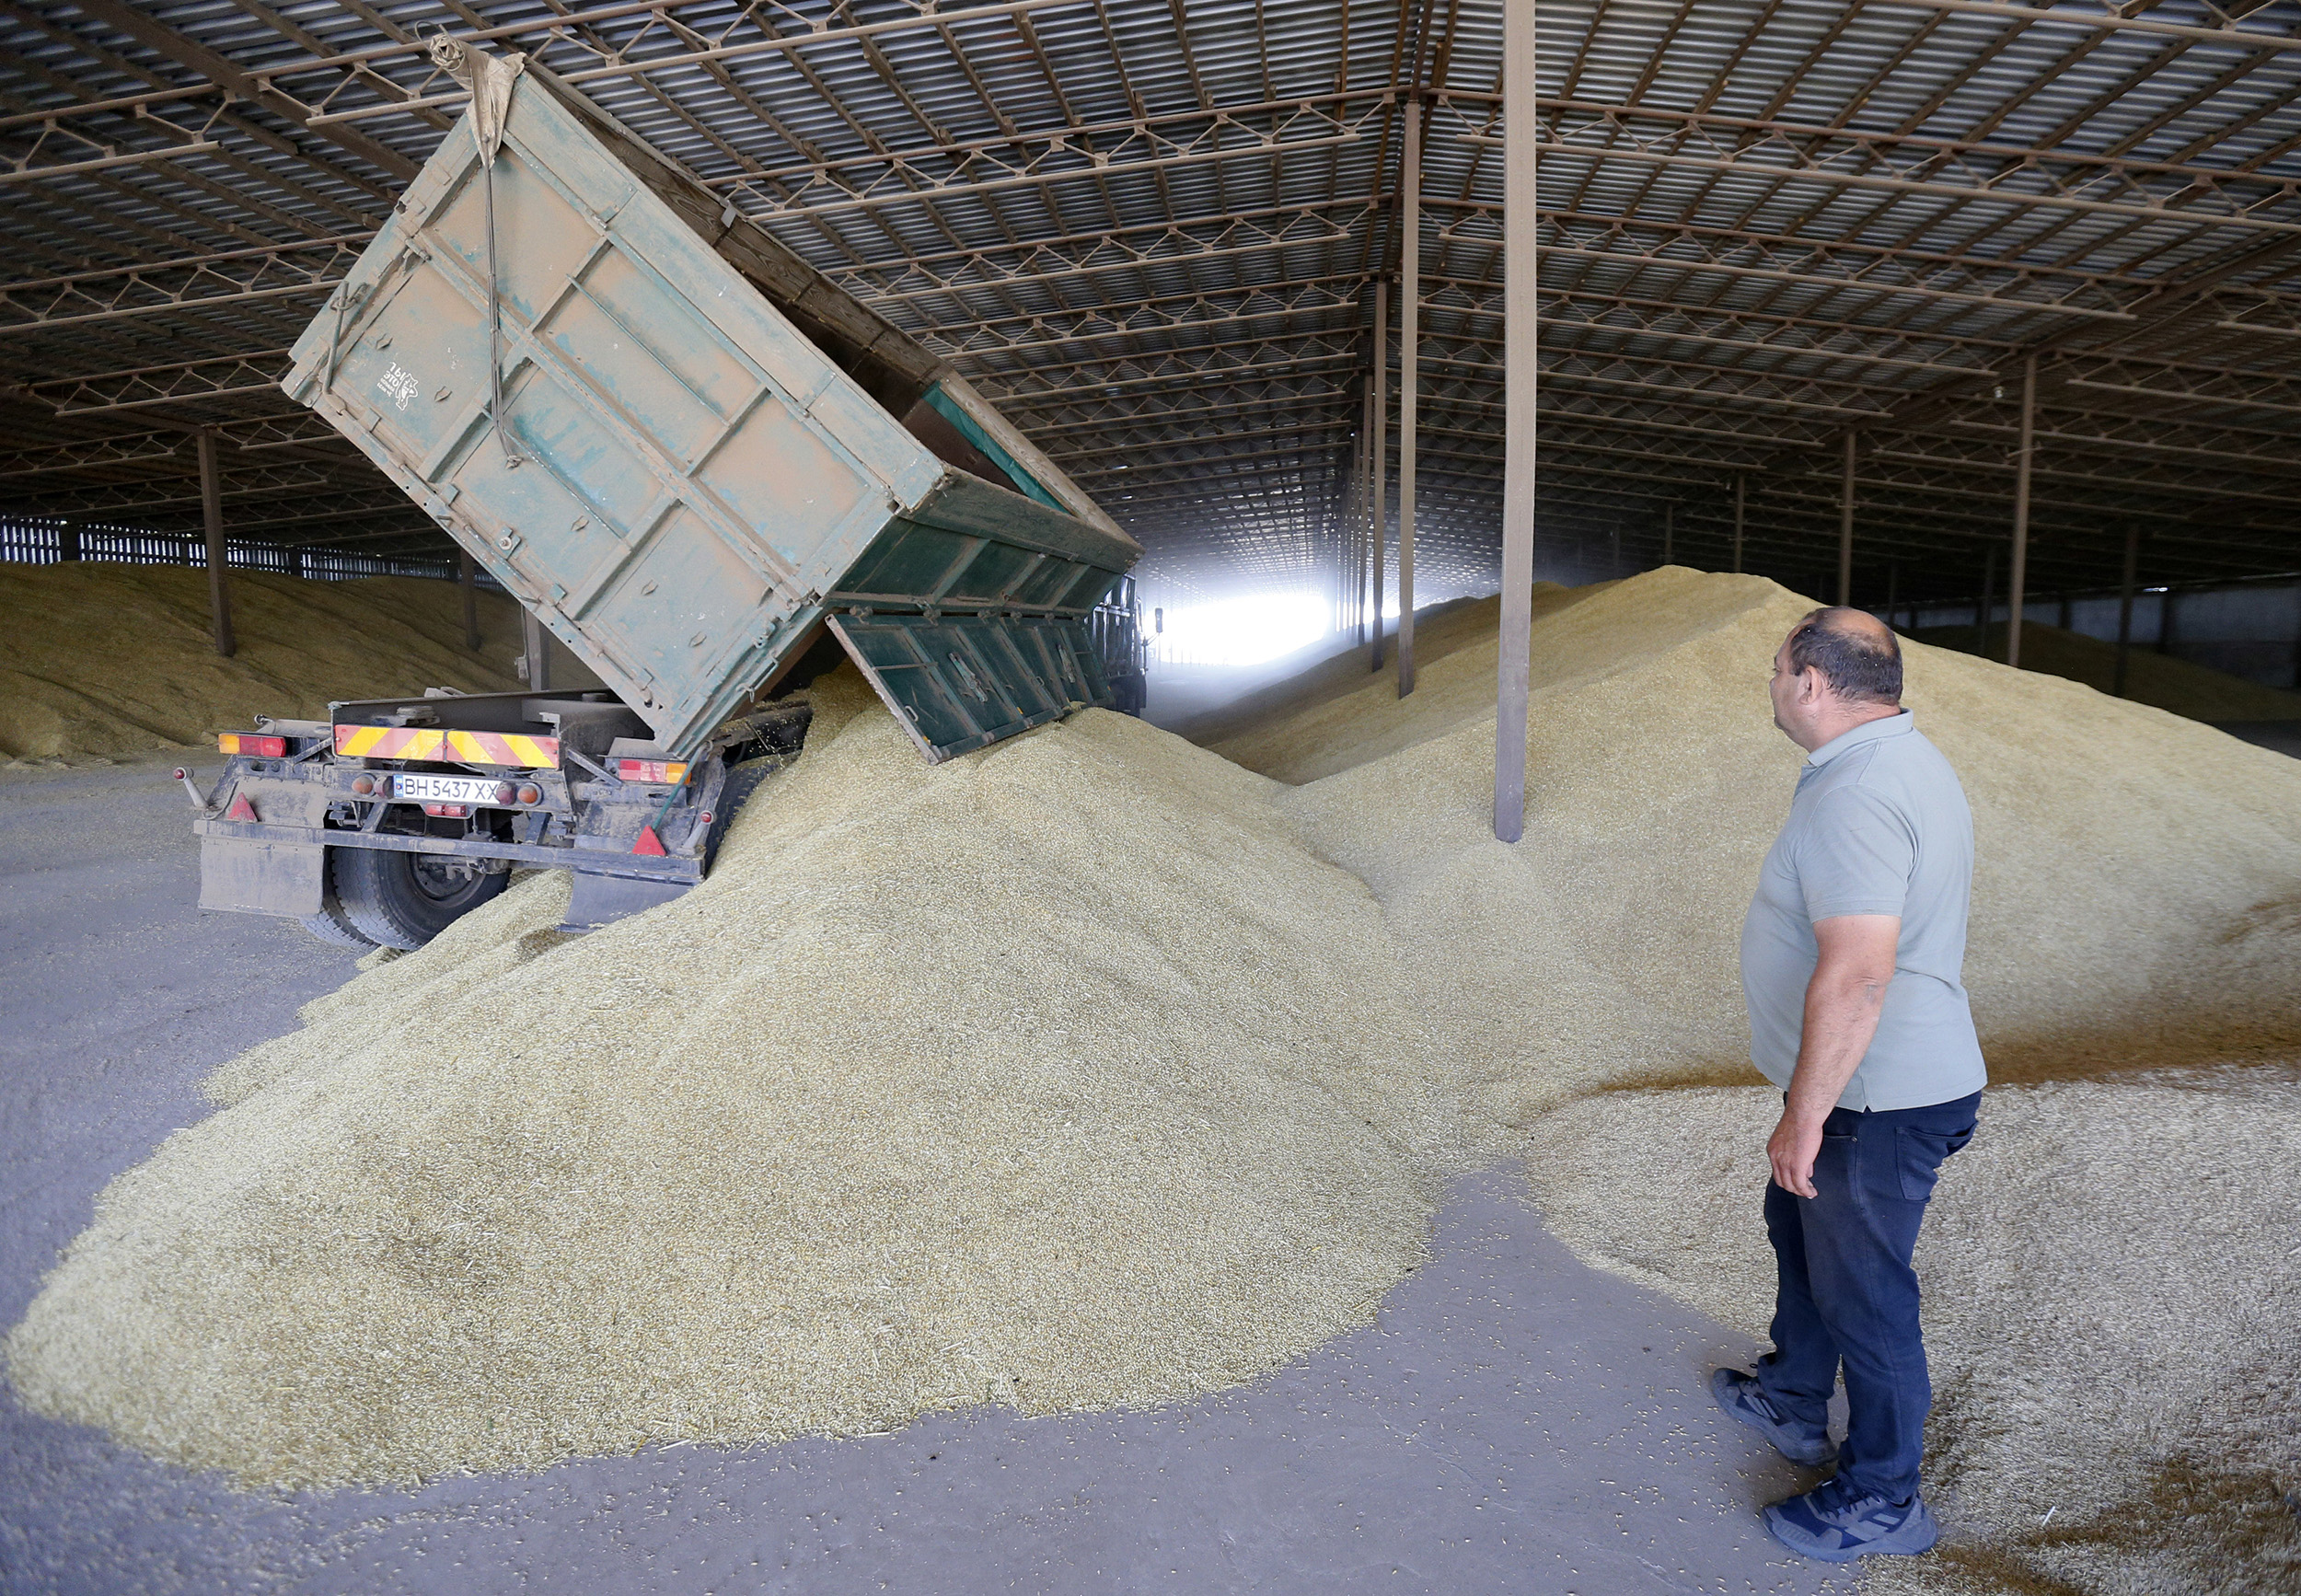 A truck driver unloads barley grains after harvest at a grain storage facility in the Odesa region, Ukraine, on 22 June.